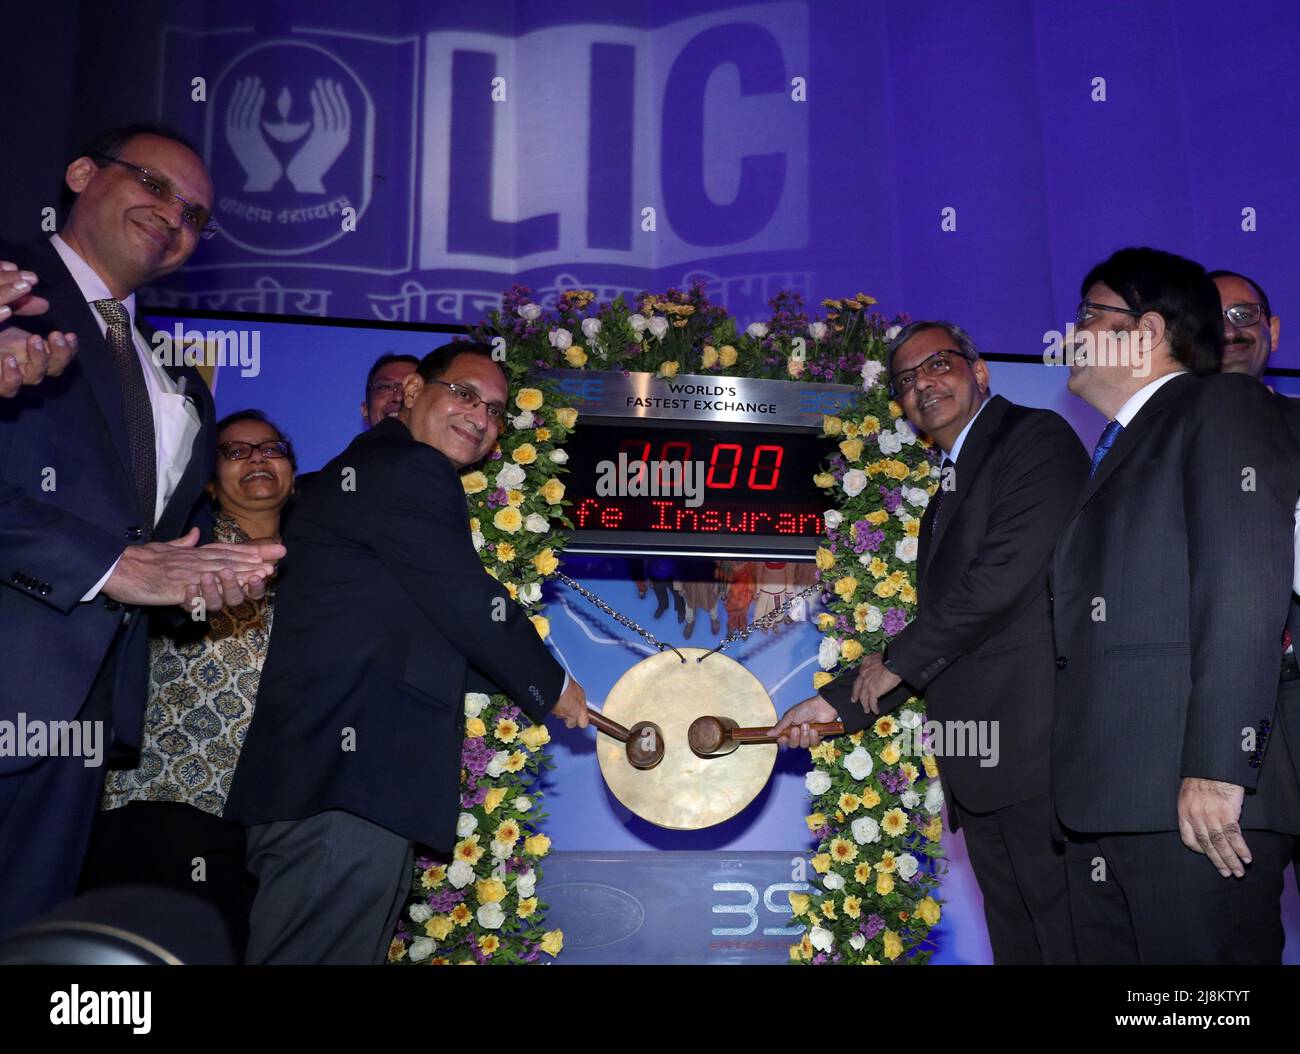 Life Insurance Corporation of India (LIC) Chairperson Mangalam Ramasubramanian Kumar and Tuhin Kanta Pandey, Secretary Department of Investment and Public Asset Management (DIPAM), hit the ceremonial gong during the company's IPO listing ceremony at the Bombay Stock Exchange (BSE) in Mumbai, India, May 17, 2022. REUTERS/Niharika Kulkarni Stock Photo